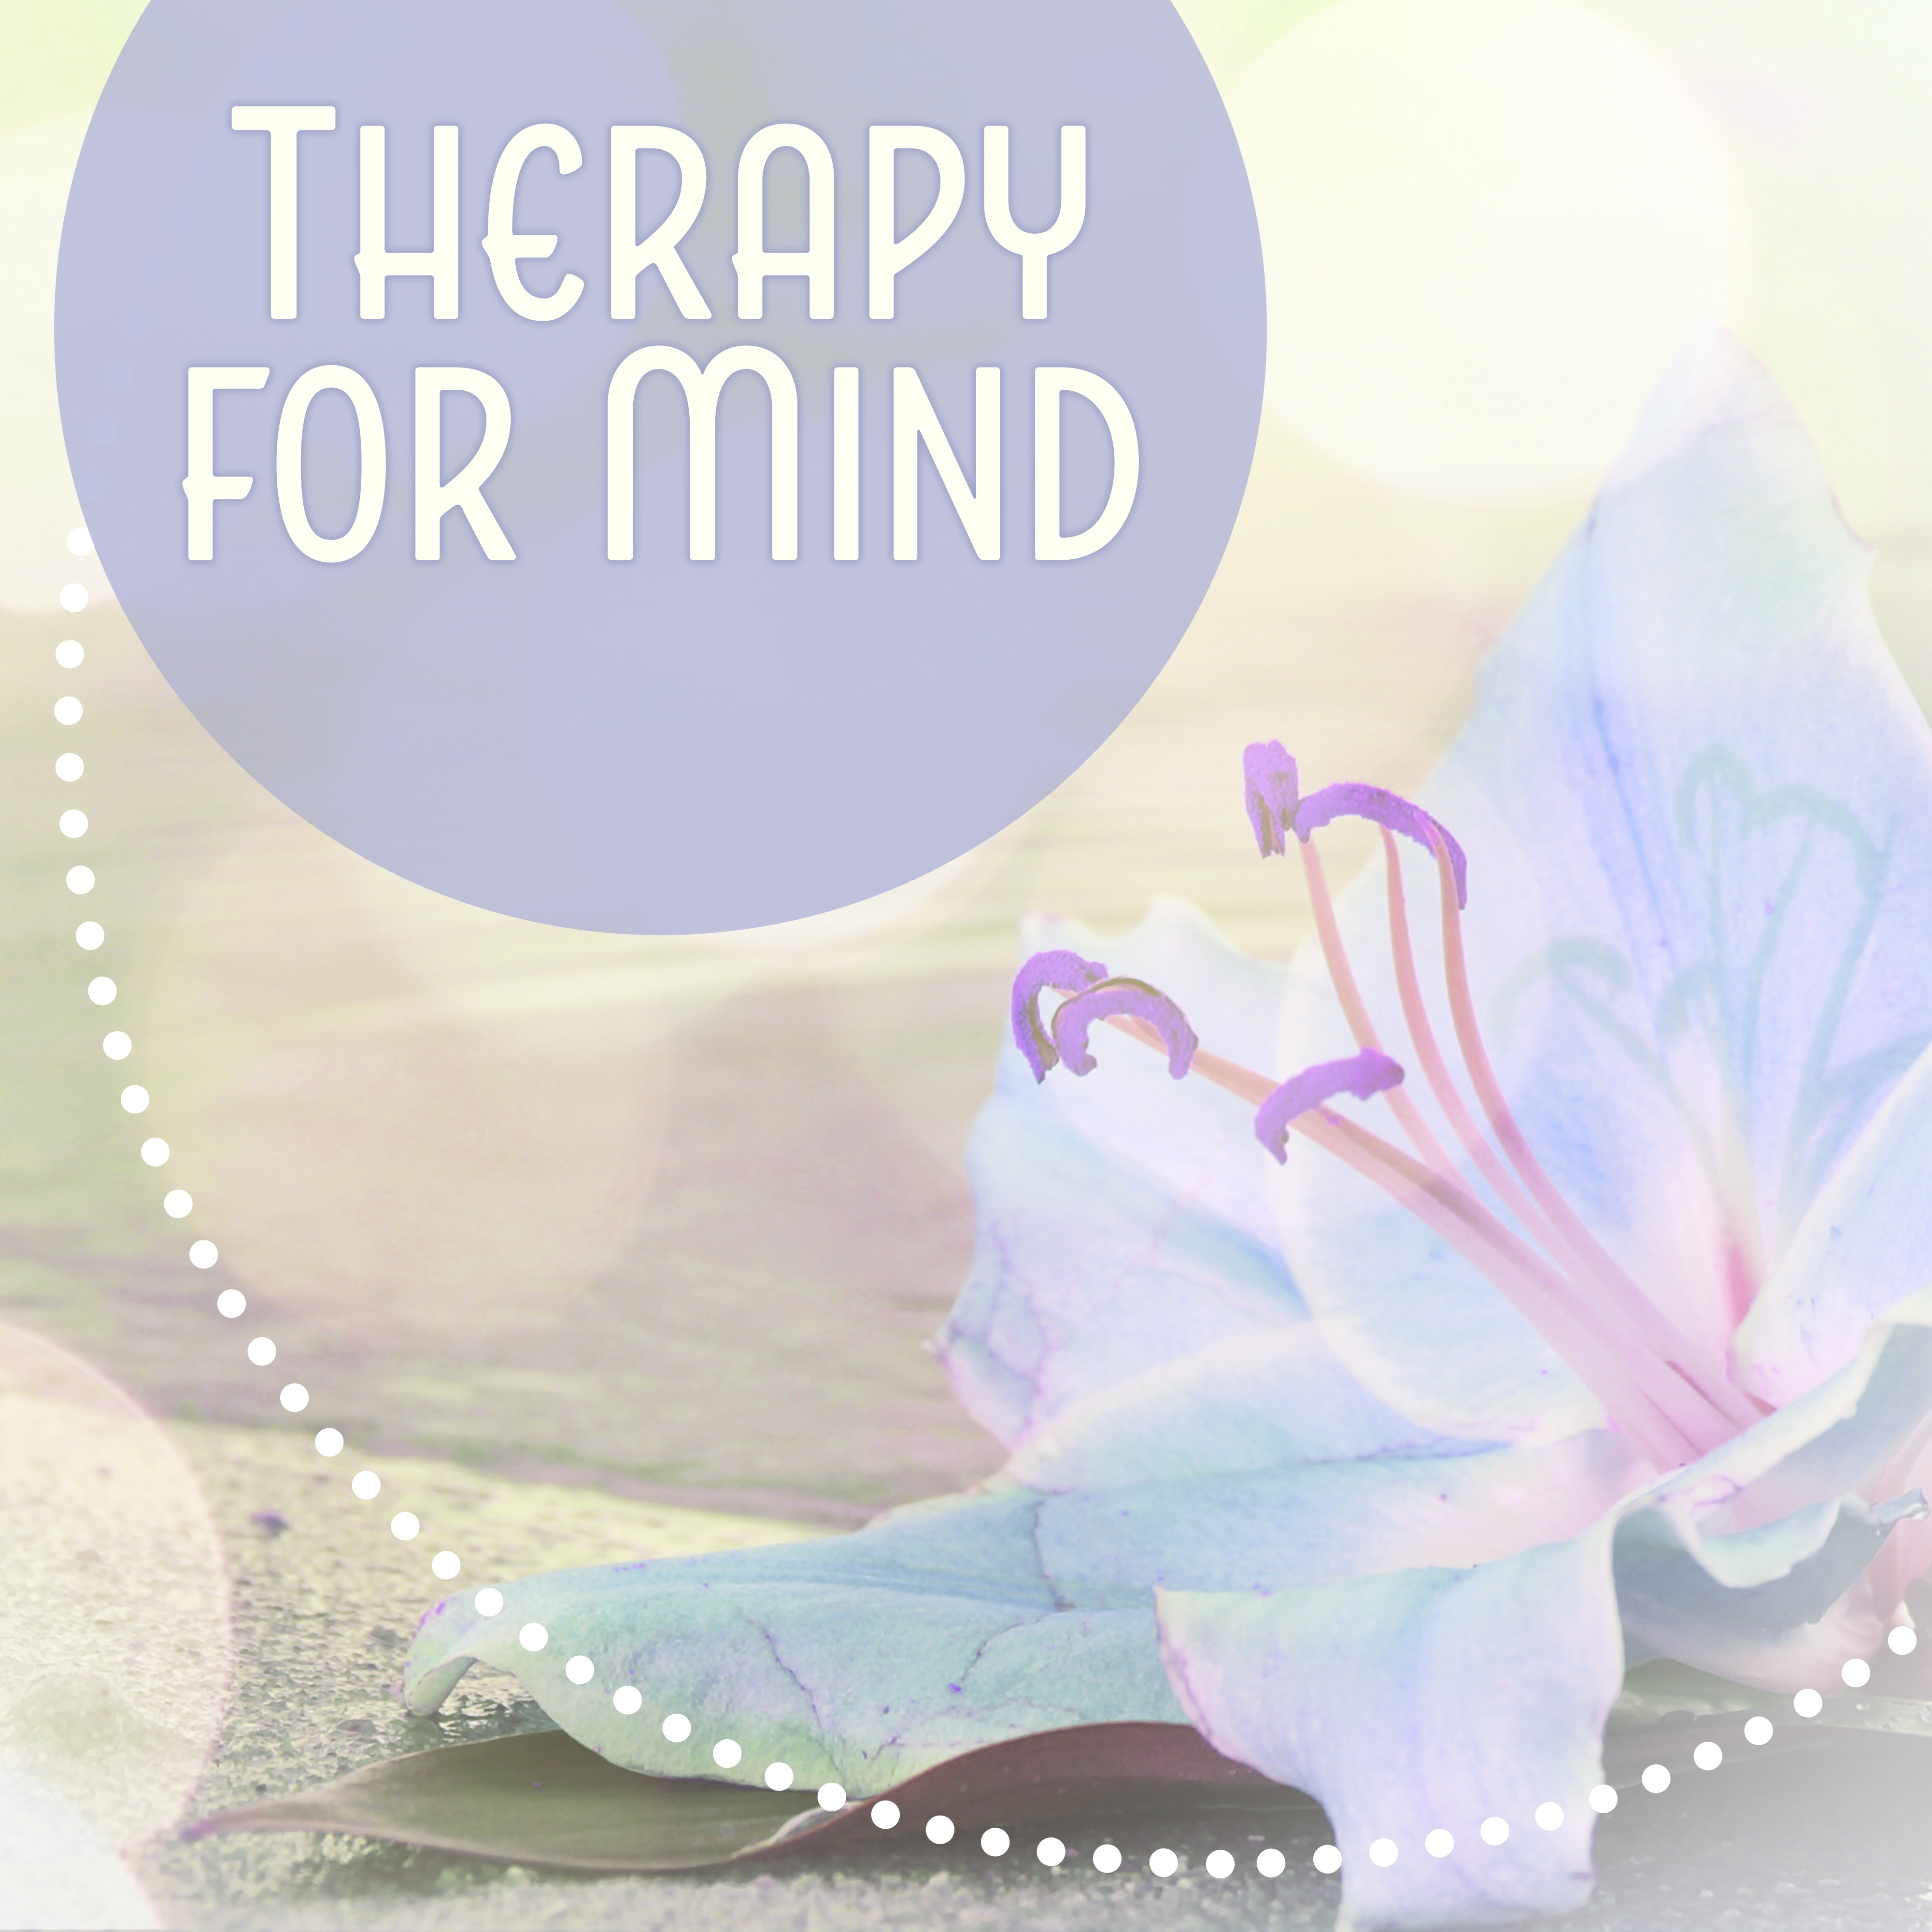 Therapy for Mind  Soft Nature Sounds for Wellness, Massage, Spa Dreams, Relaxing Waves, Nature Music, Stress Relief, Pure Spa